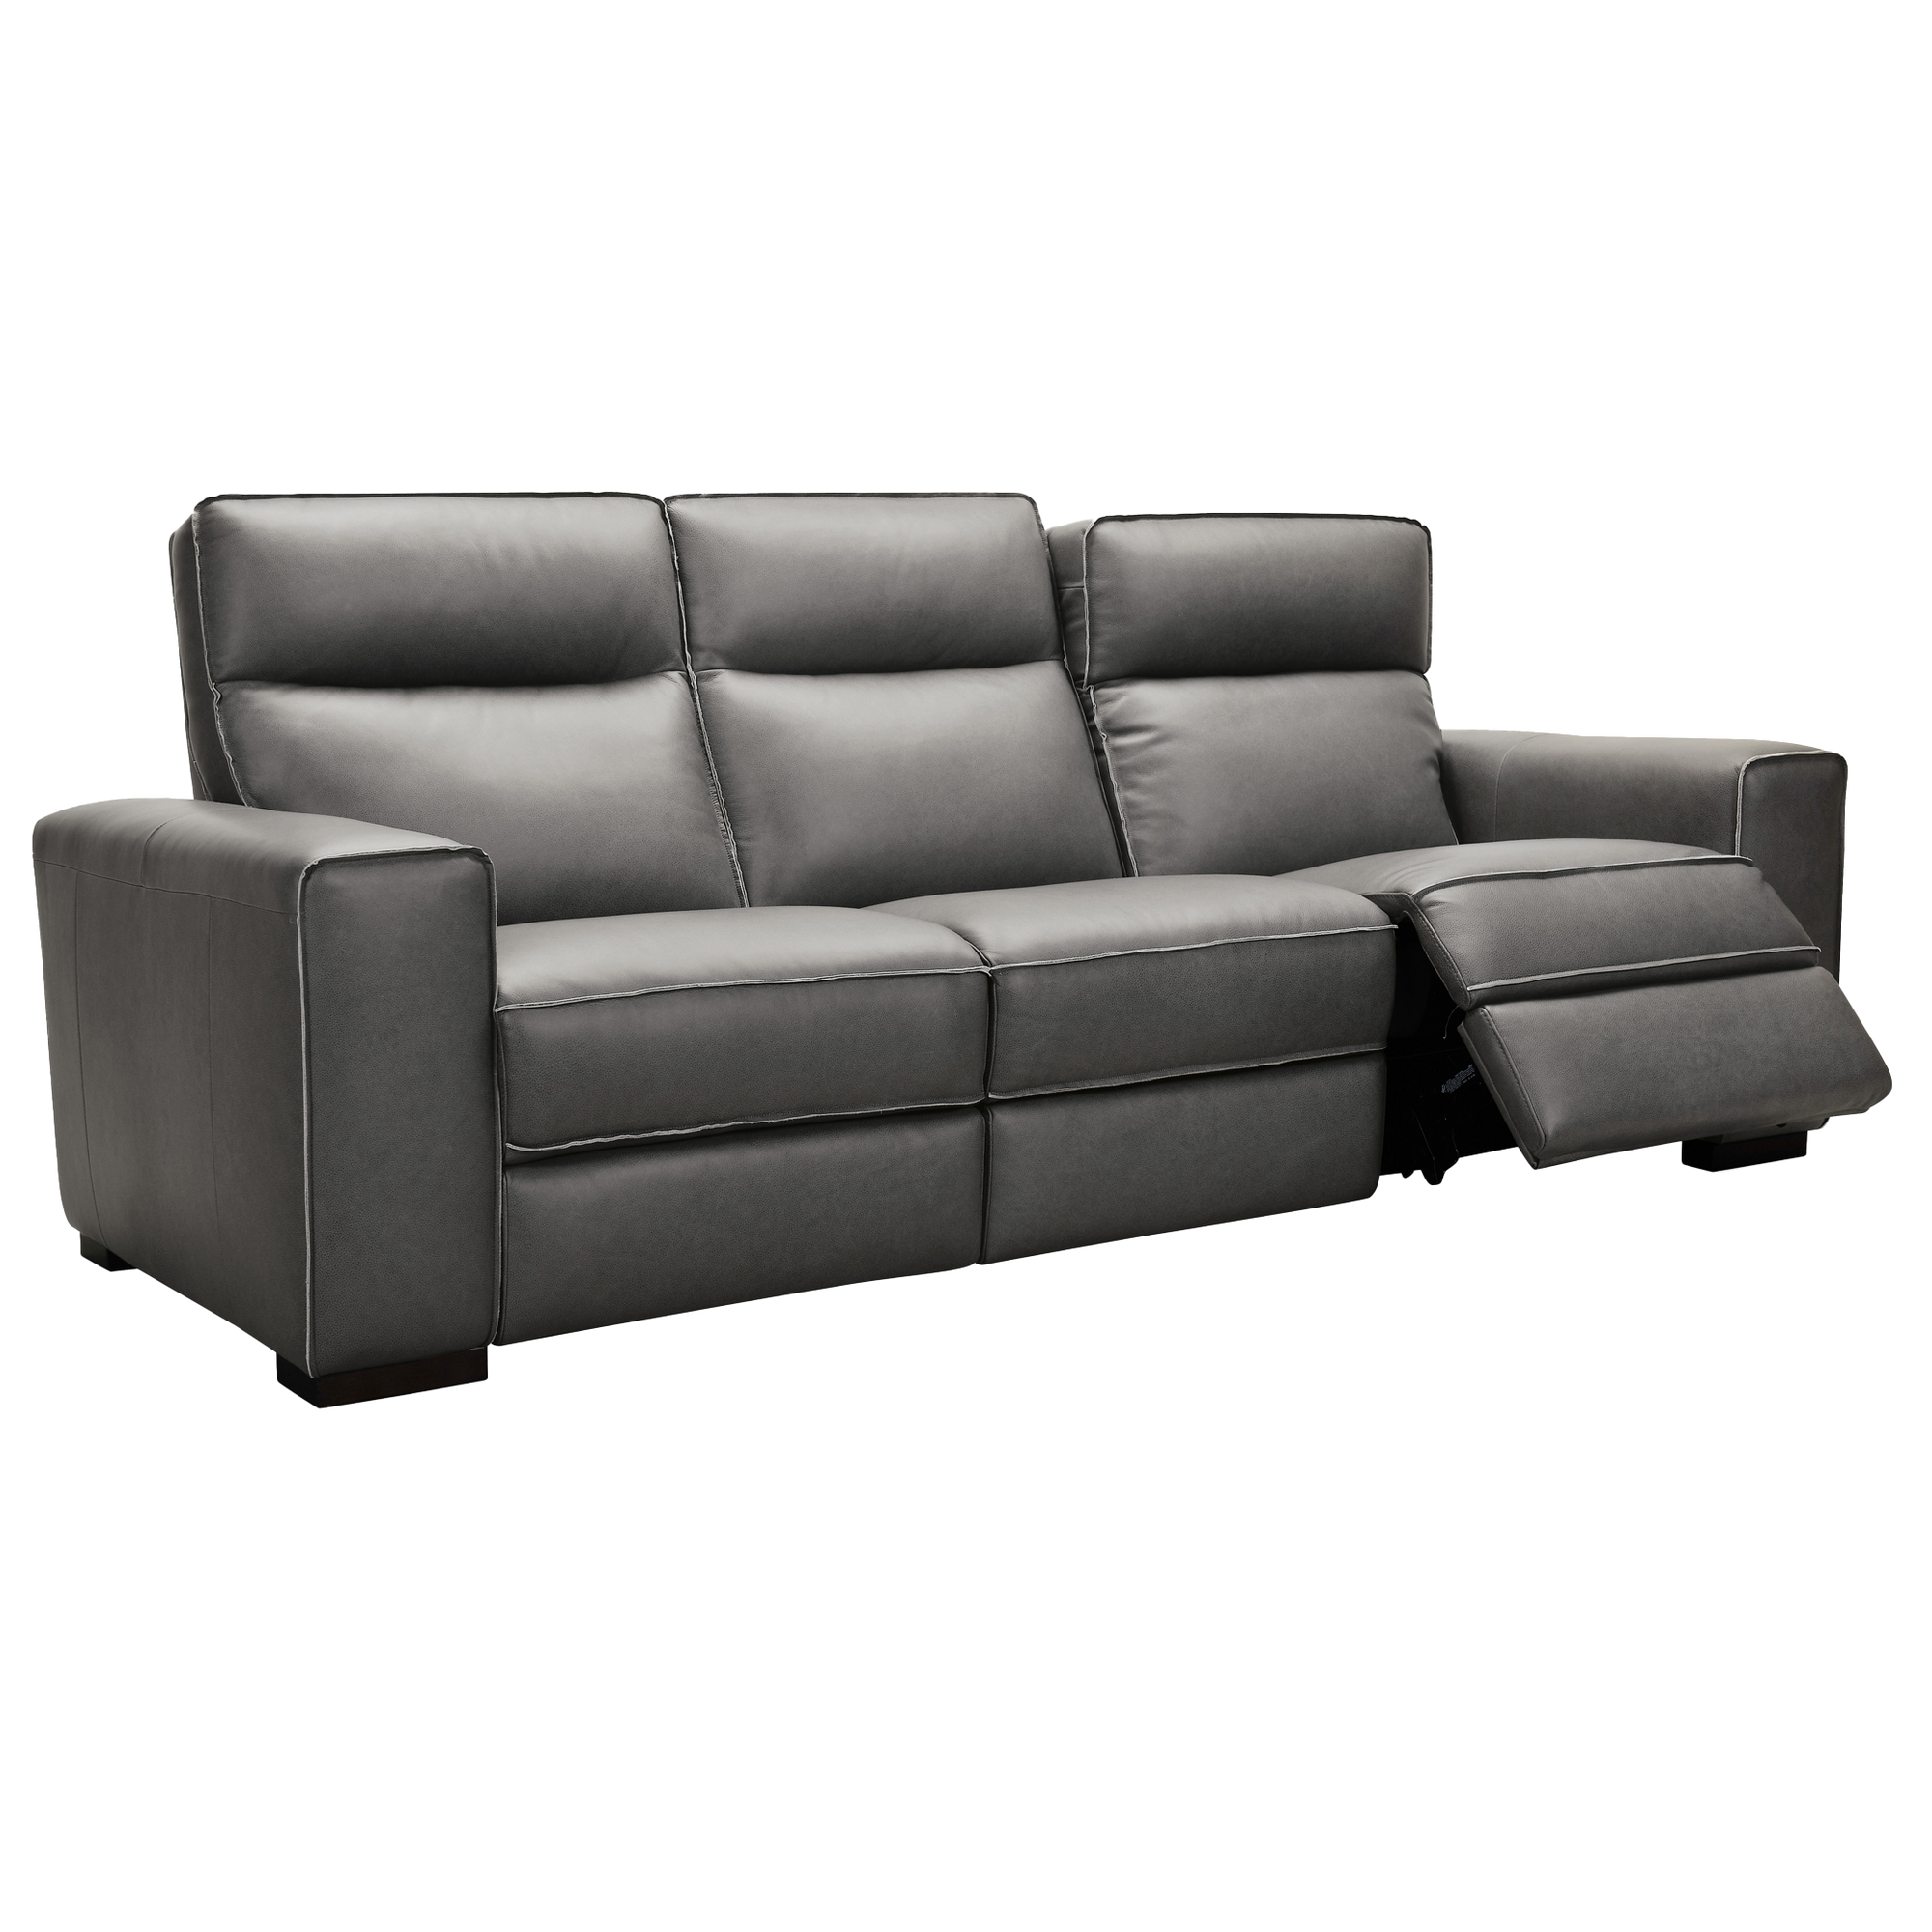 Baxlee 95" Wide Upholstered Leather Sofa, Gray